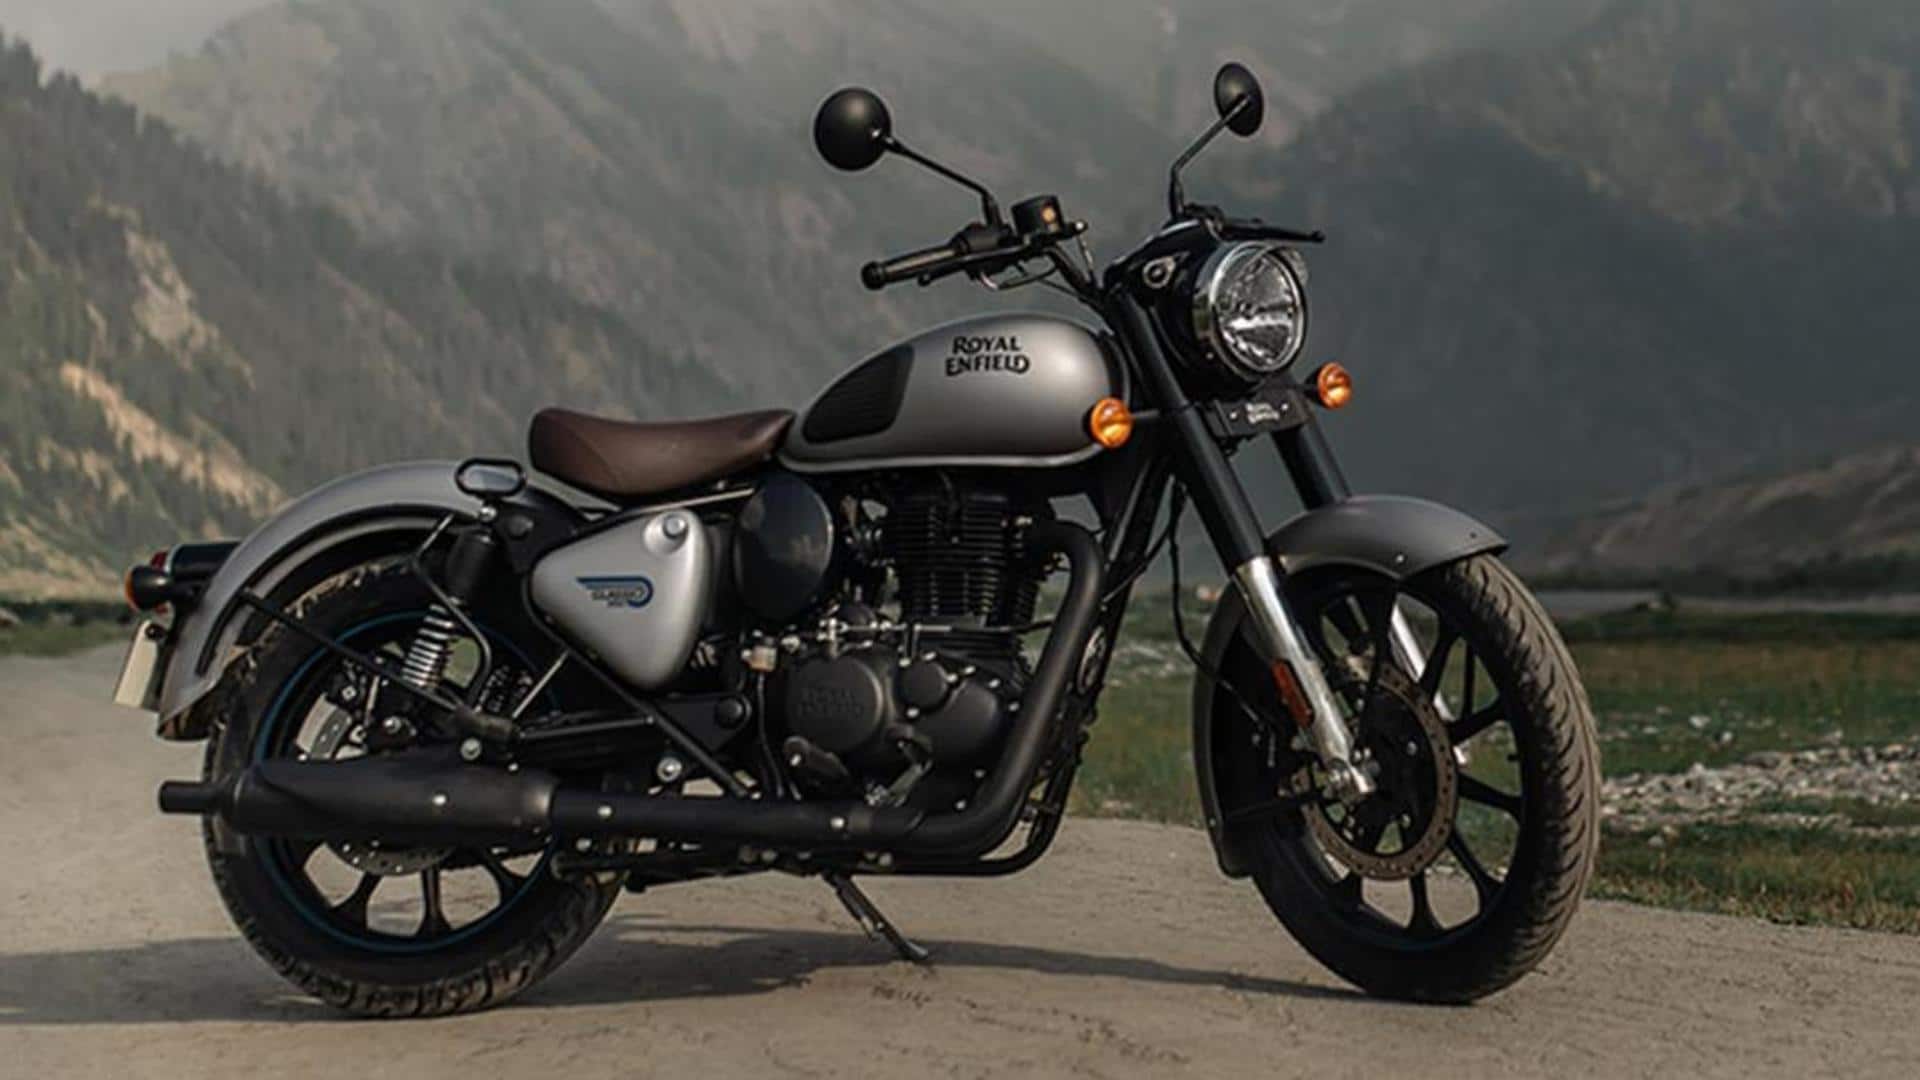 Royal Enfield is readying EVs; first model coming in 2024